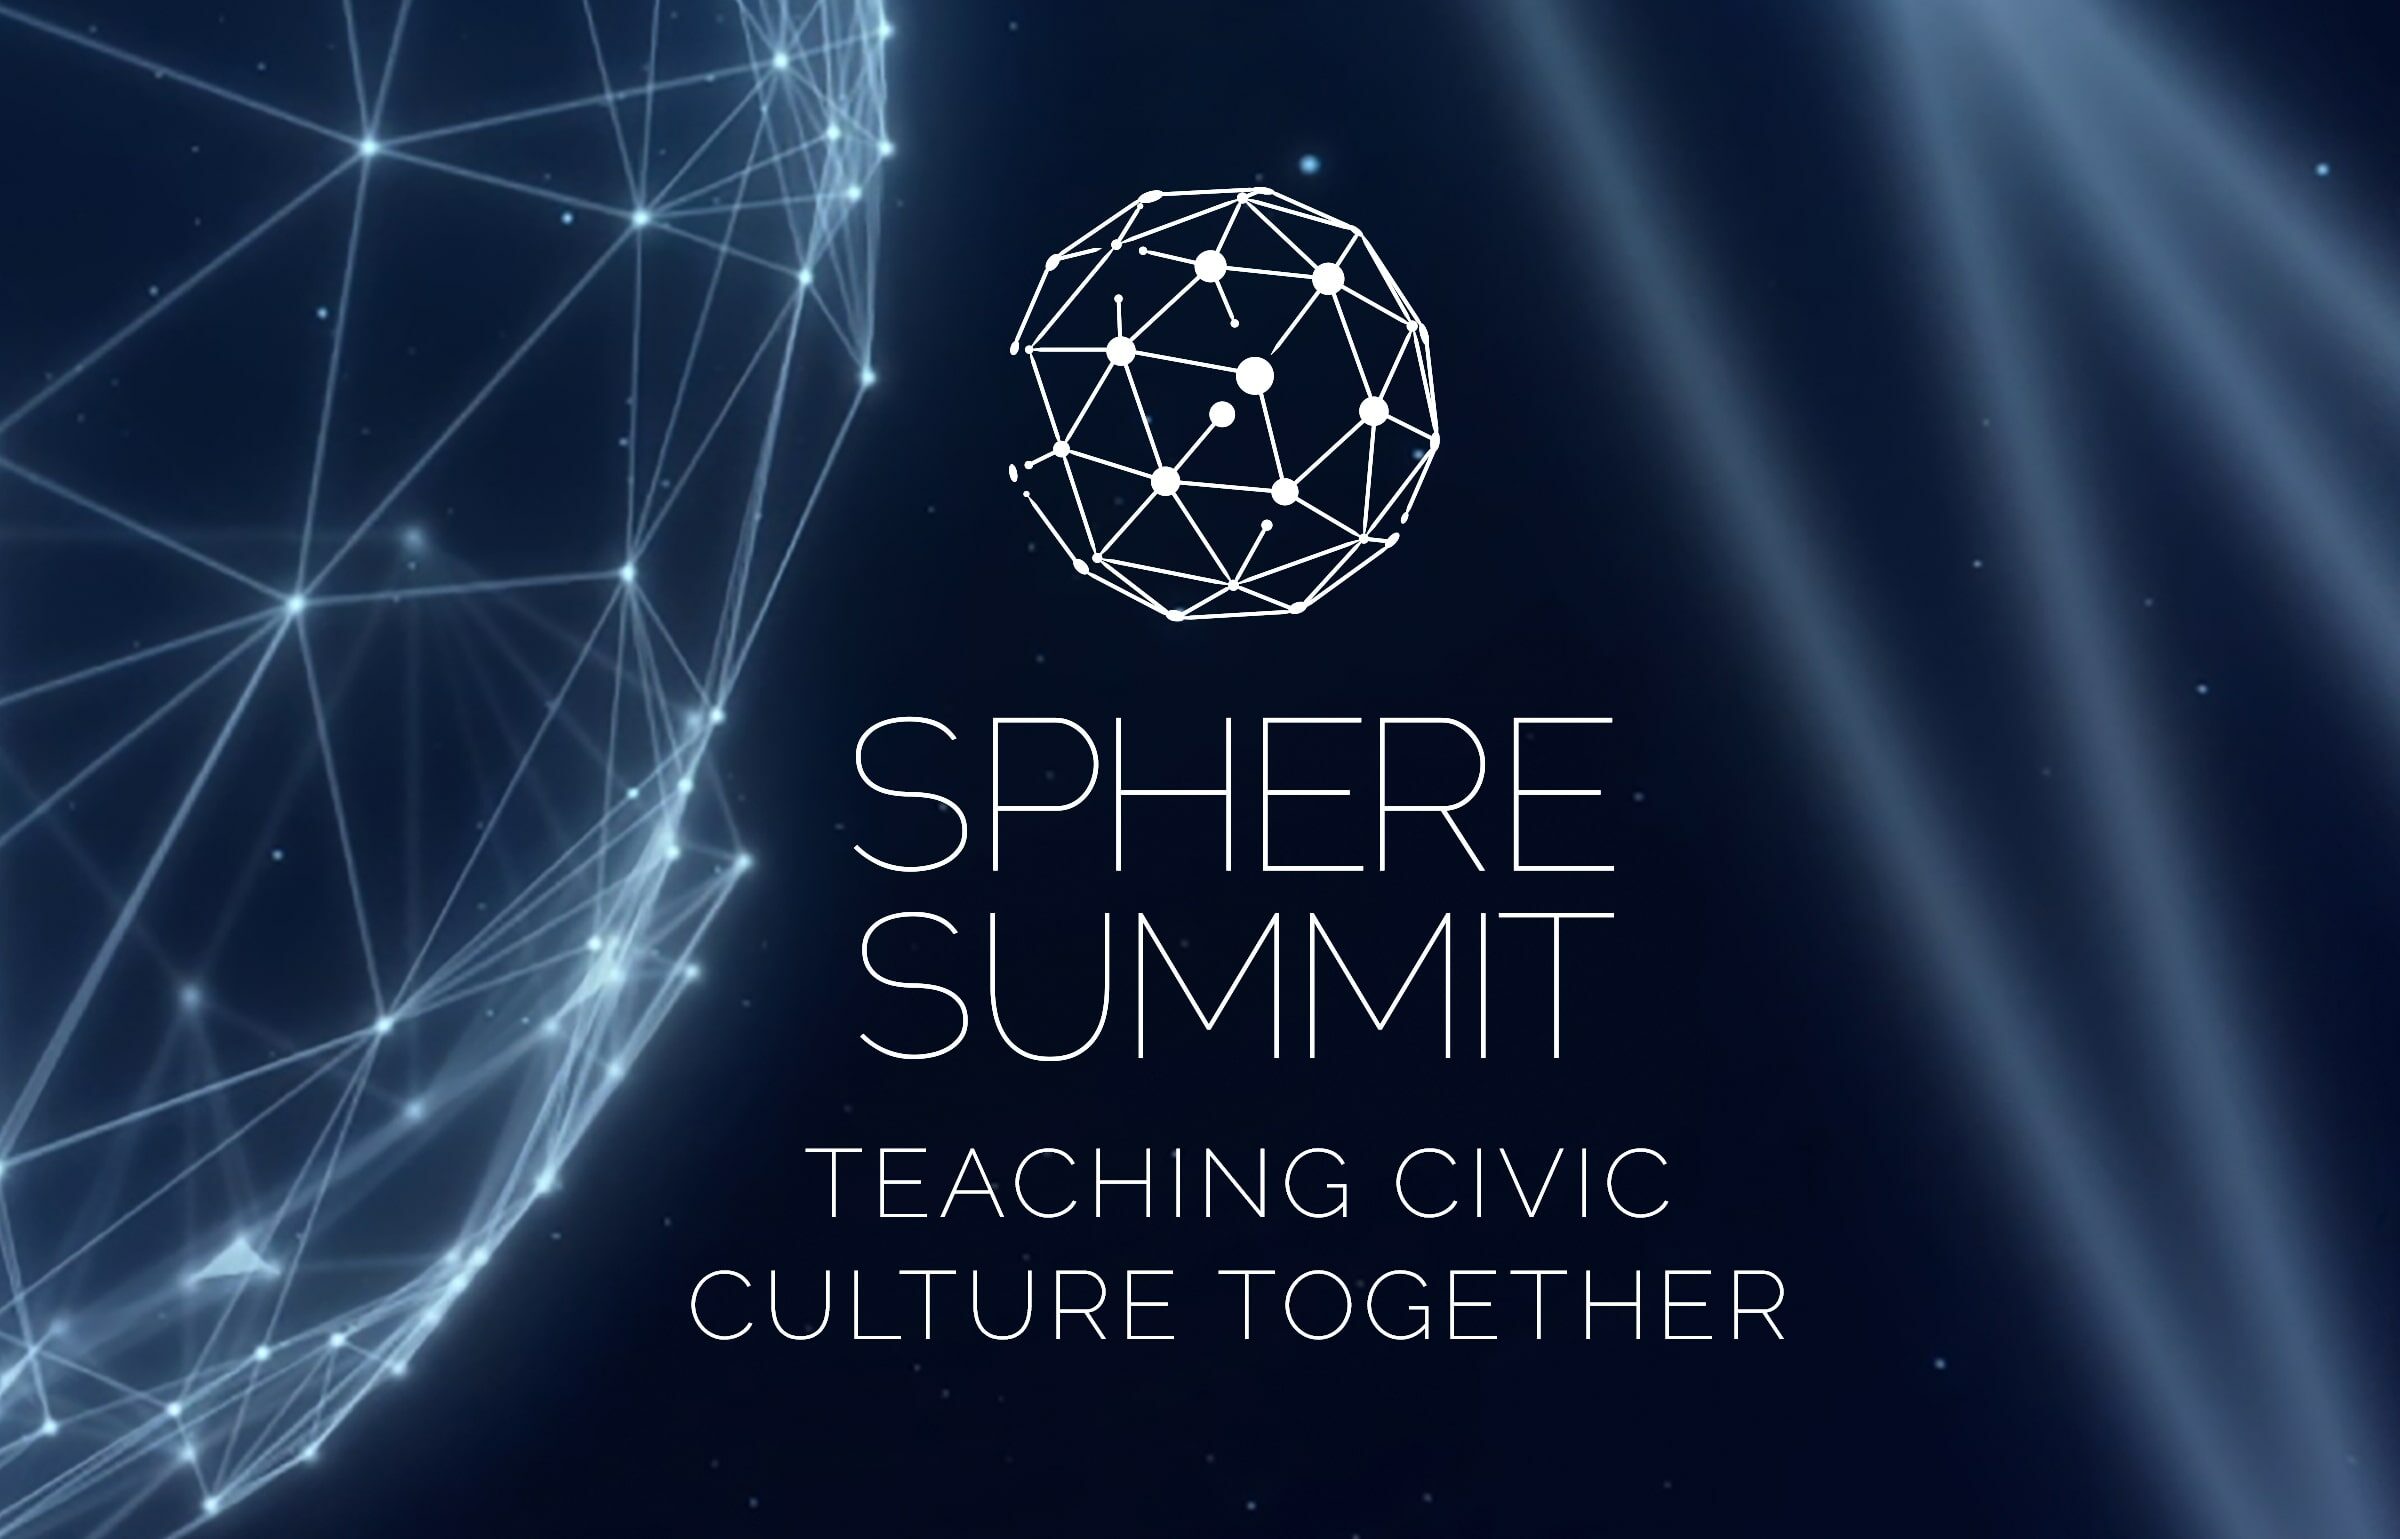 Sphere Summit: Teaching Civic Culture Together